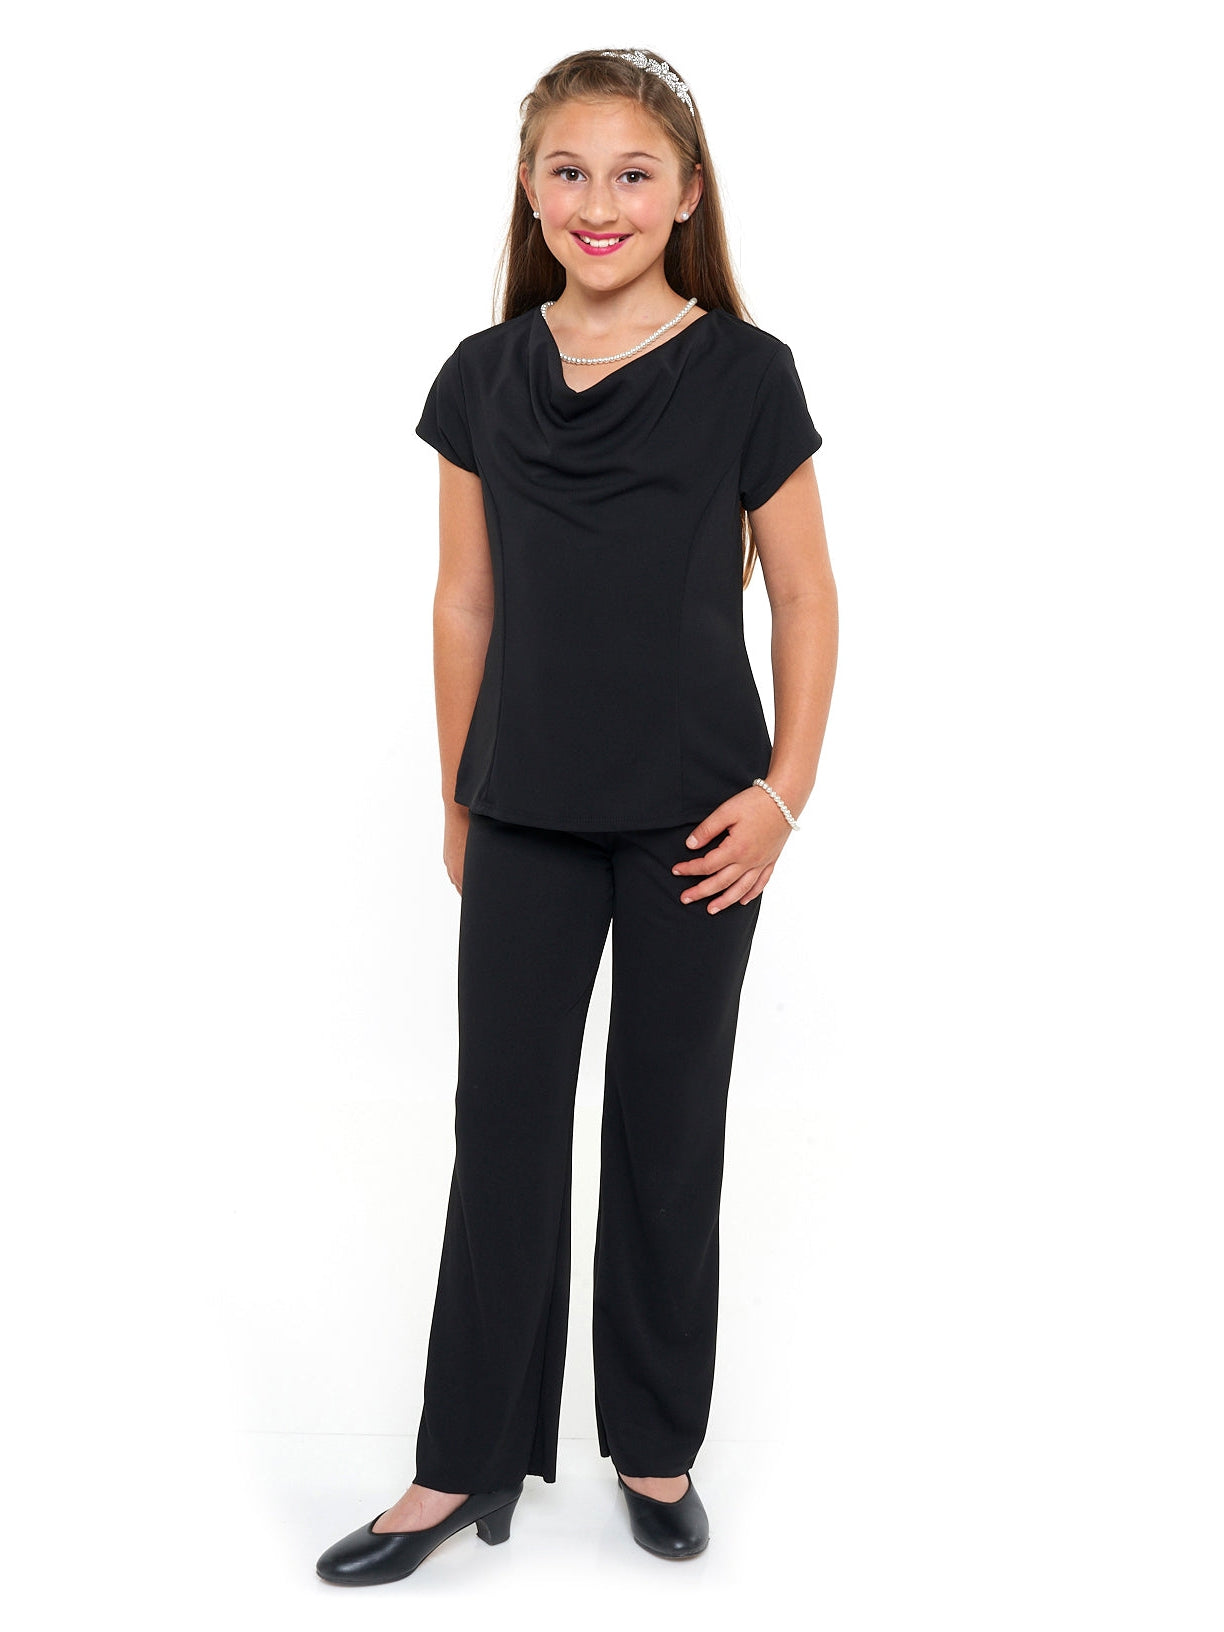 IDINA (Style #4703Y) - Separates Package - Youth